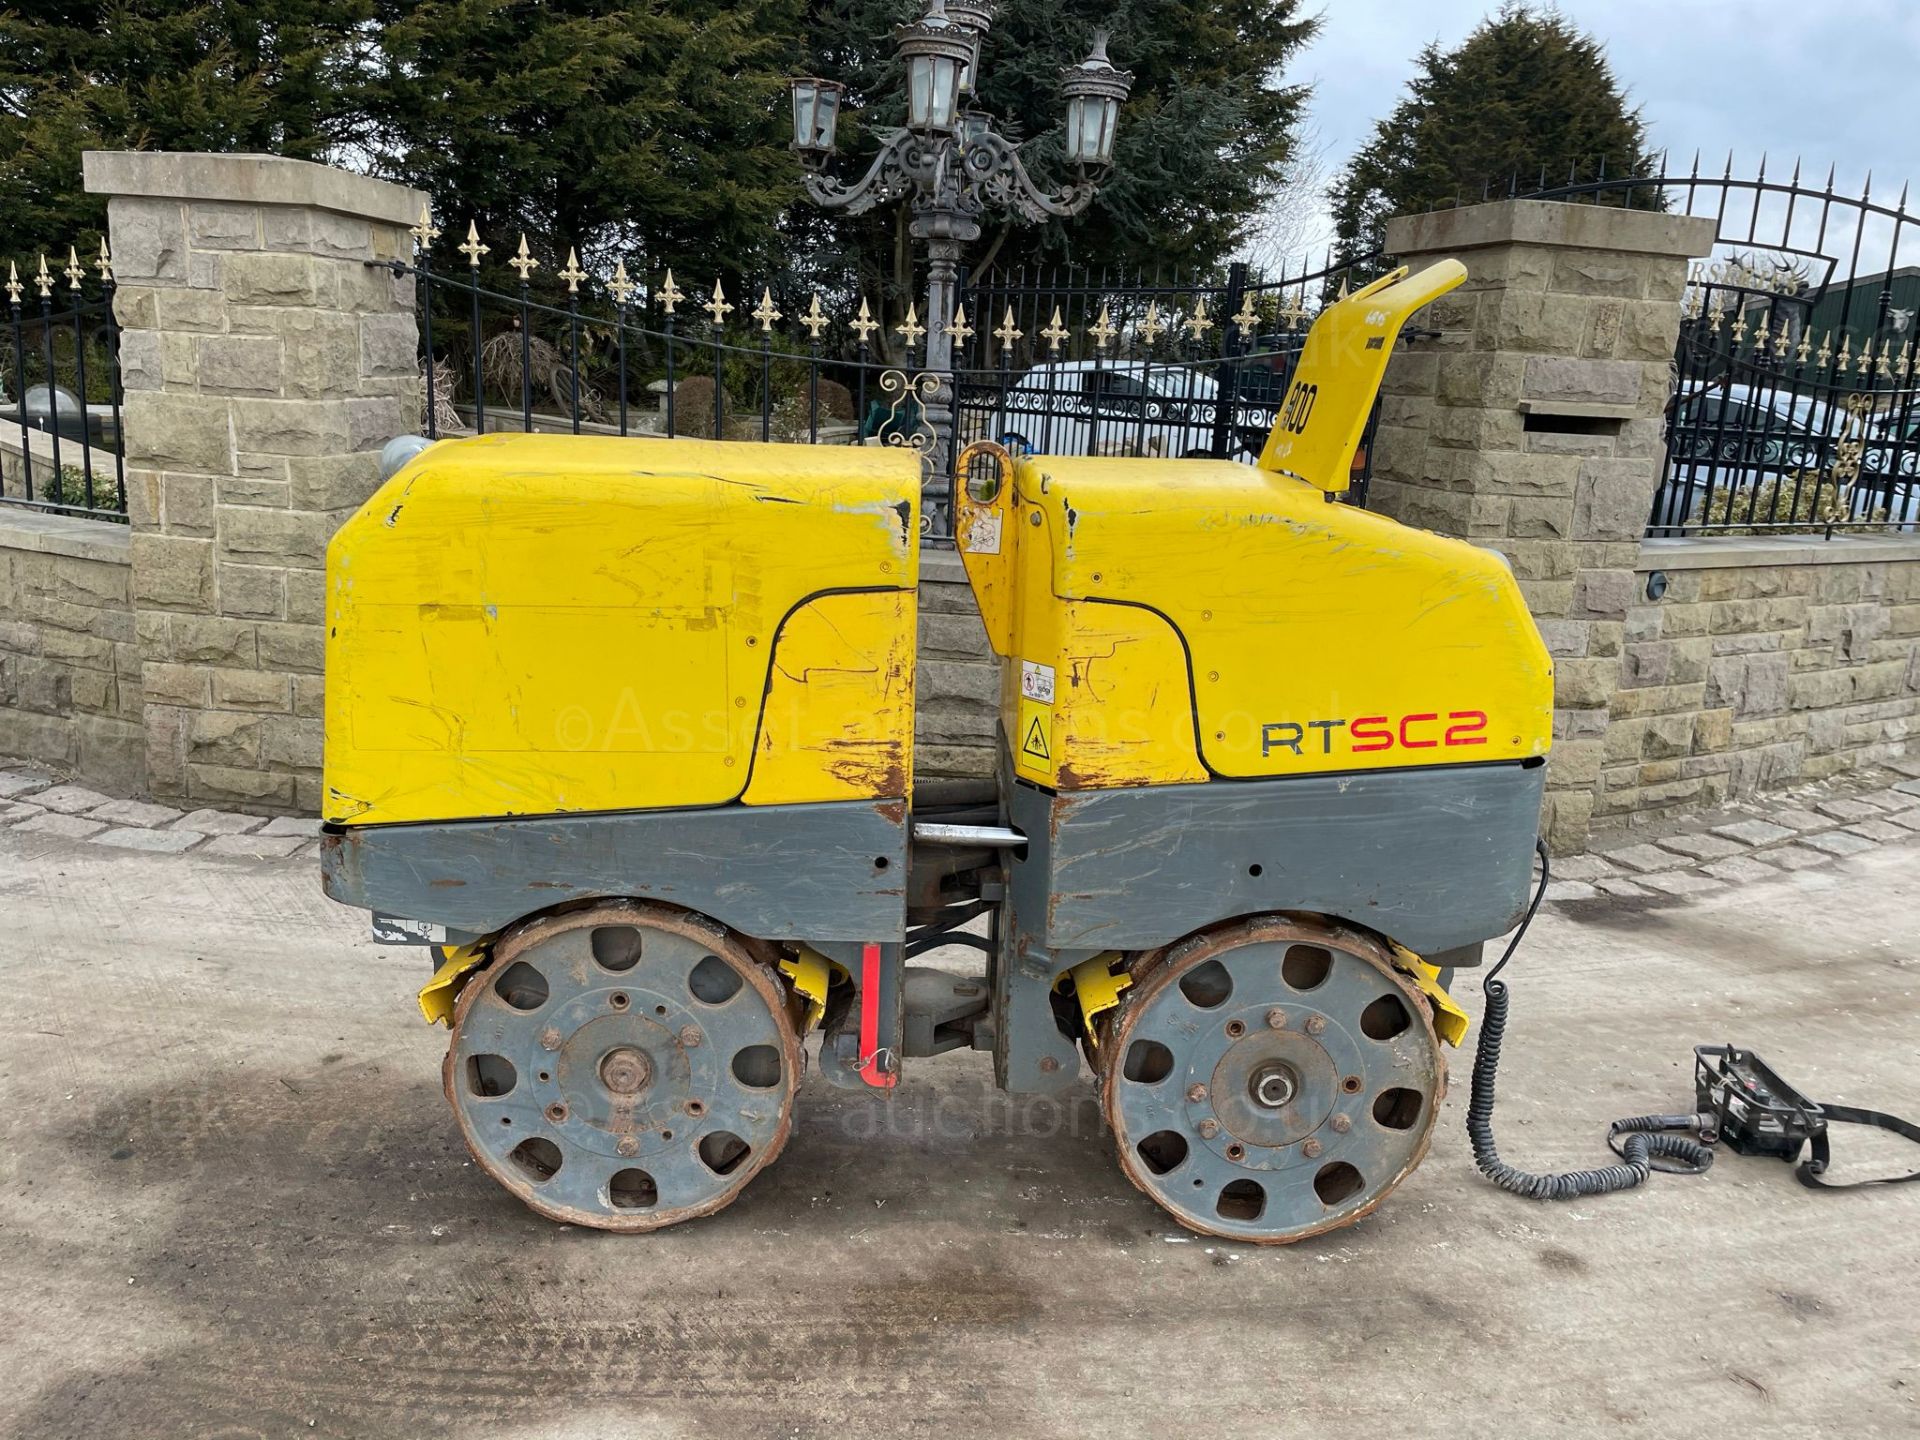 2014 WACKER NEUSON RTSC2 WALK BEHIND TRENCH ROLLER, RUNS AND DRIVES, SHOWING A LOW 402 HOURS - Image 7 of 9